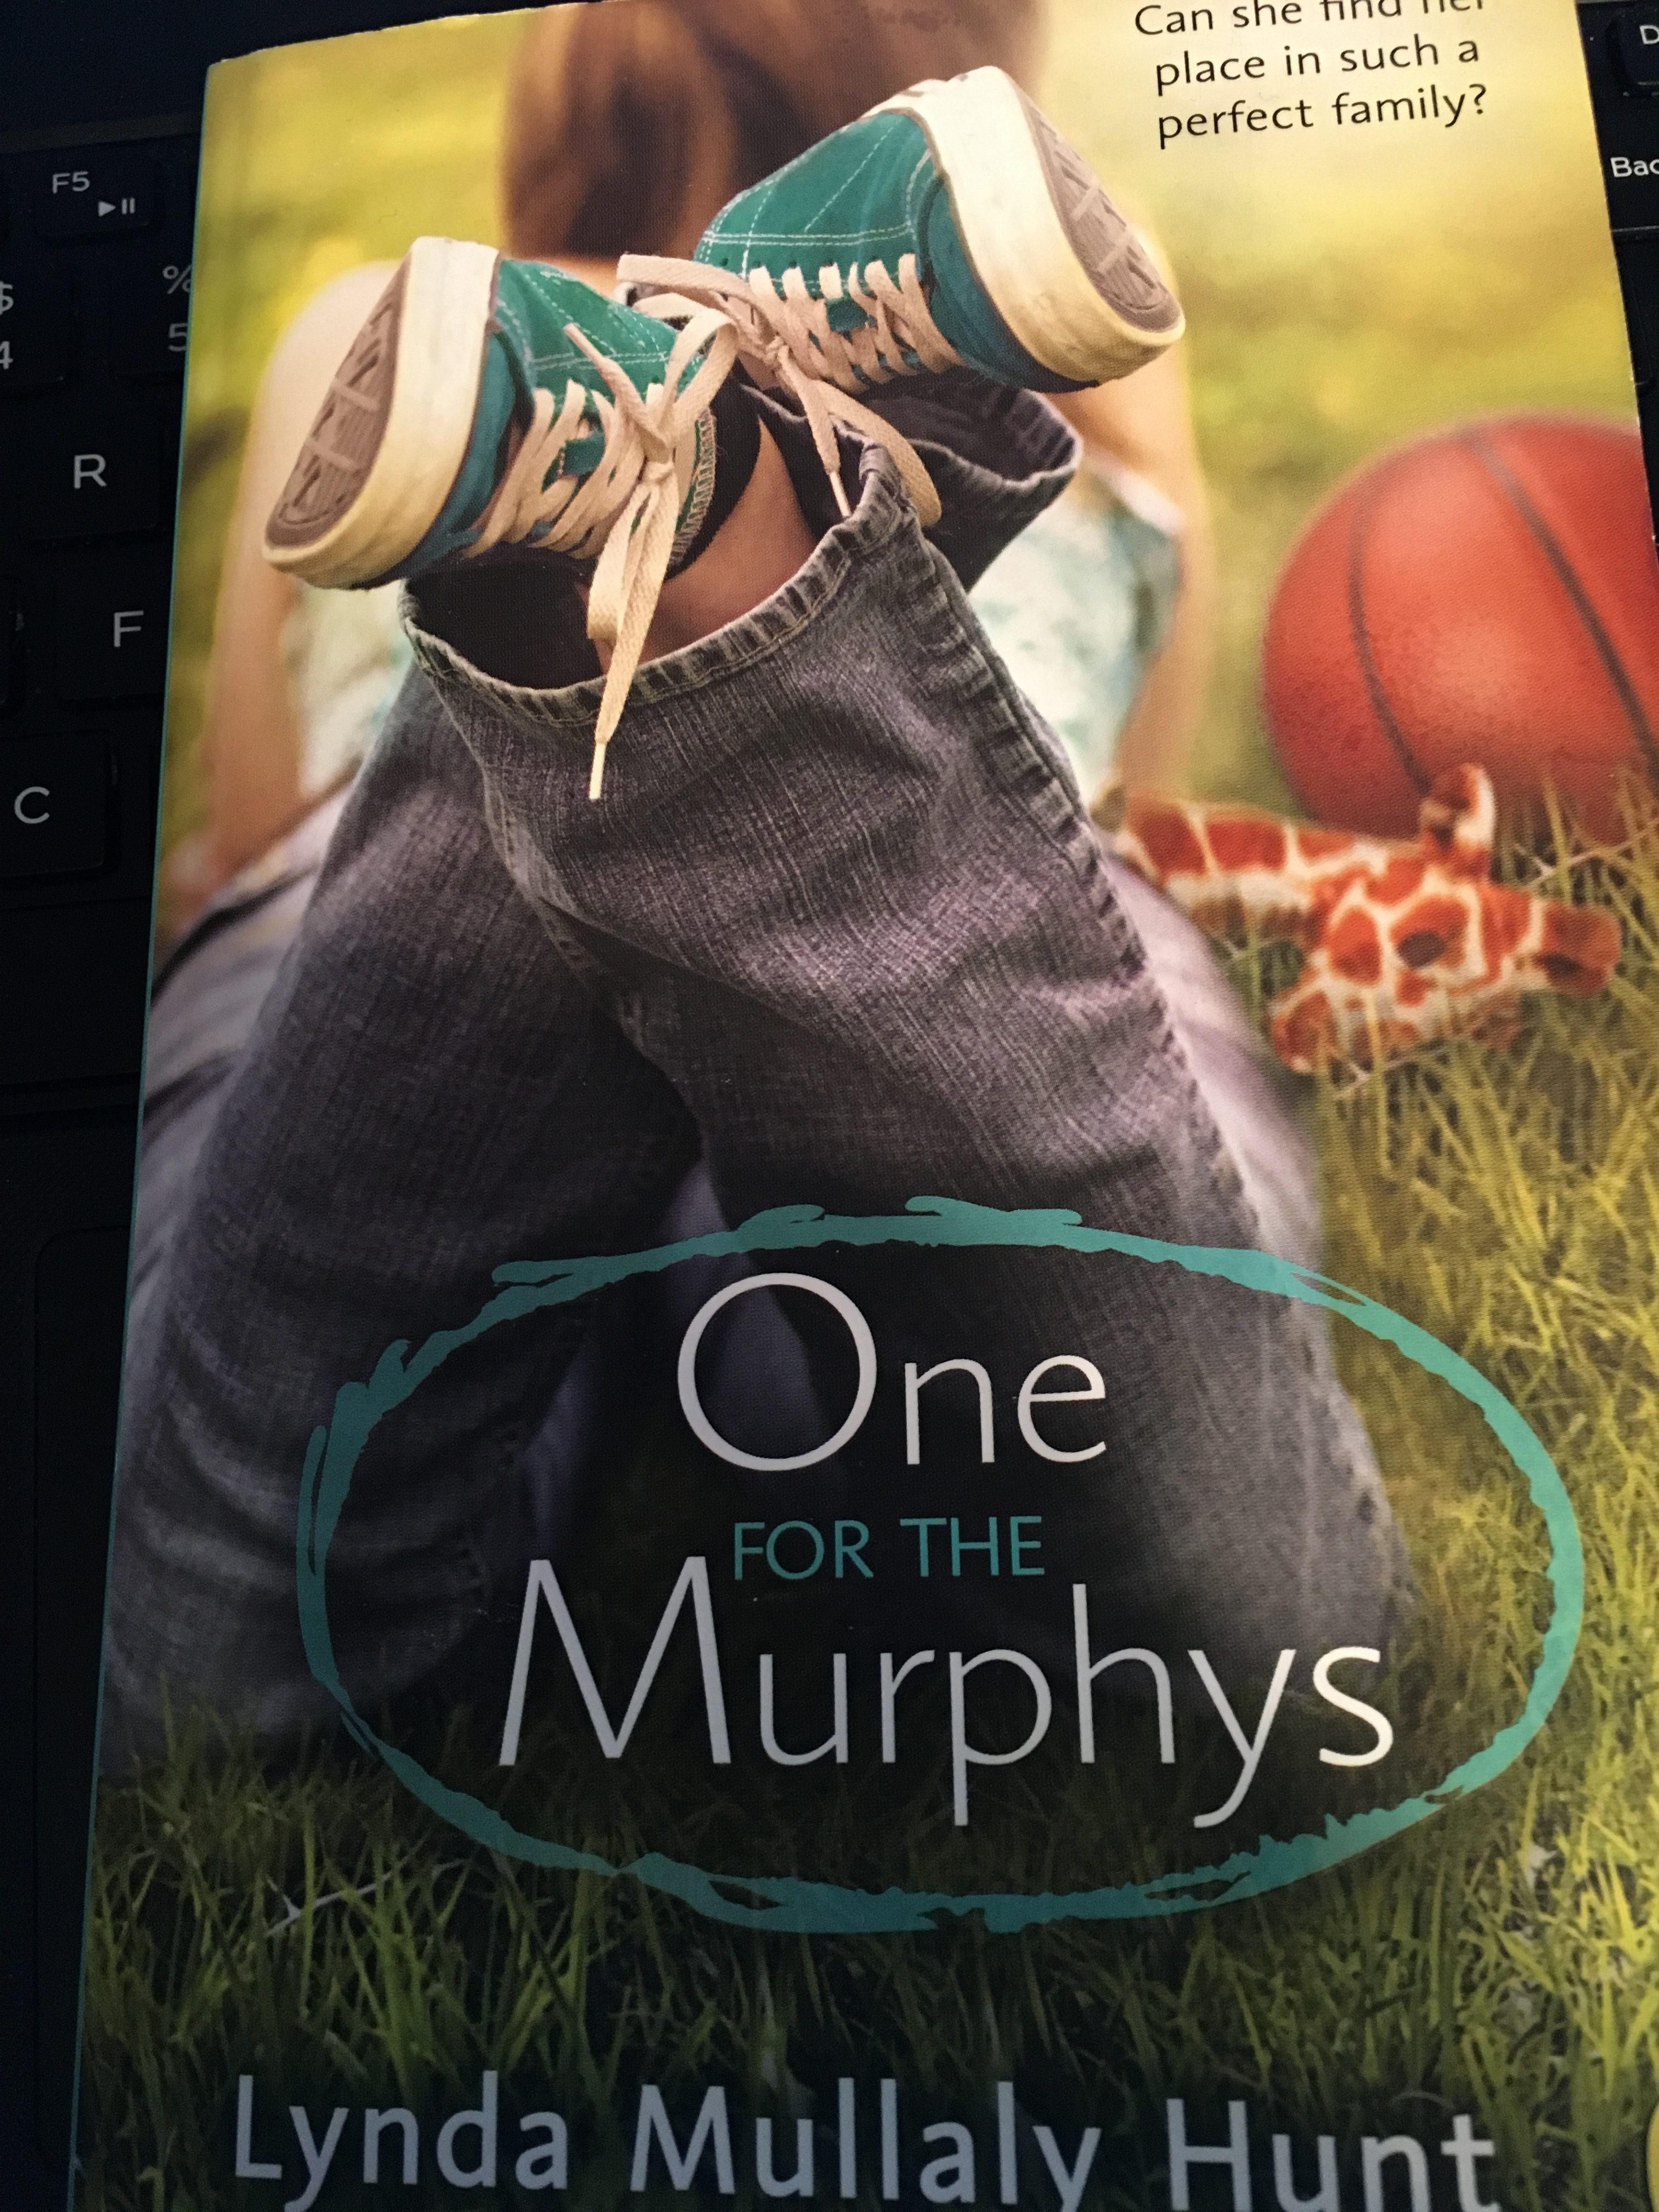 Lynda Paperback By Mullaly Hunt One for the Murphys GOOD 